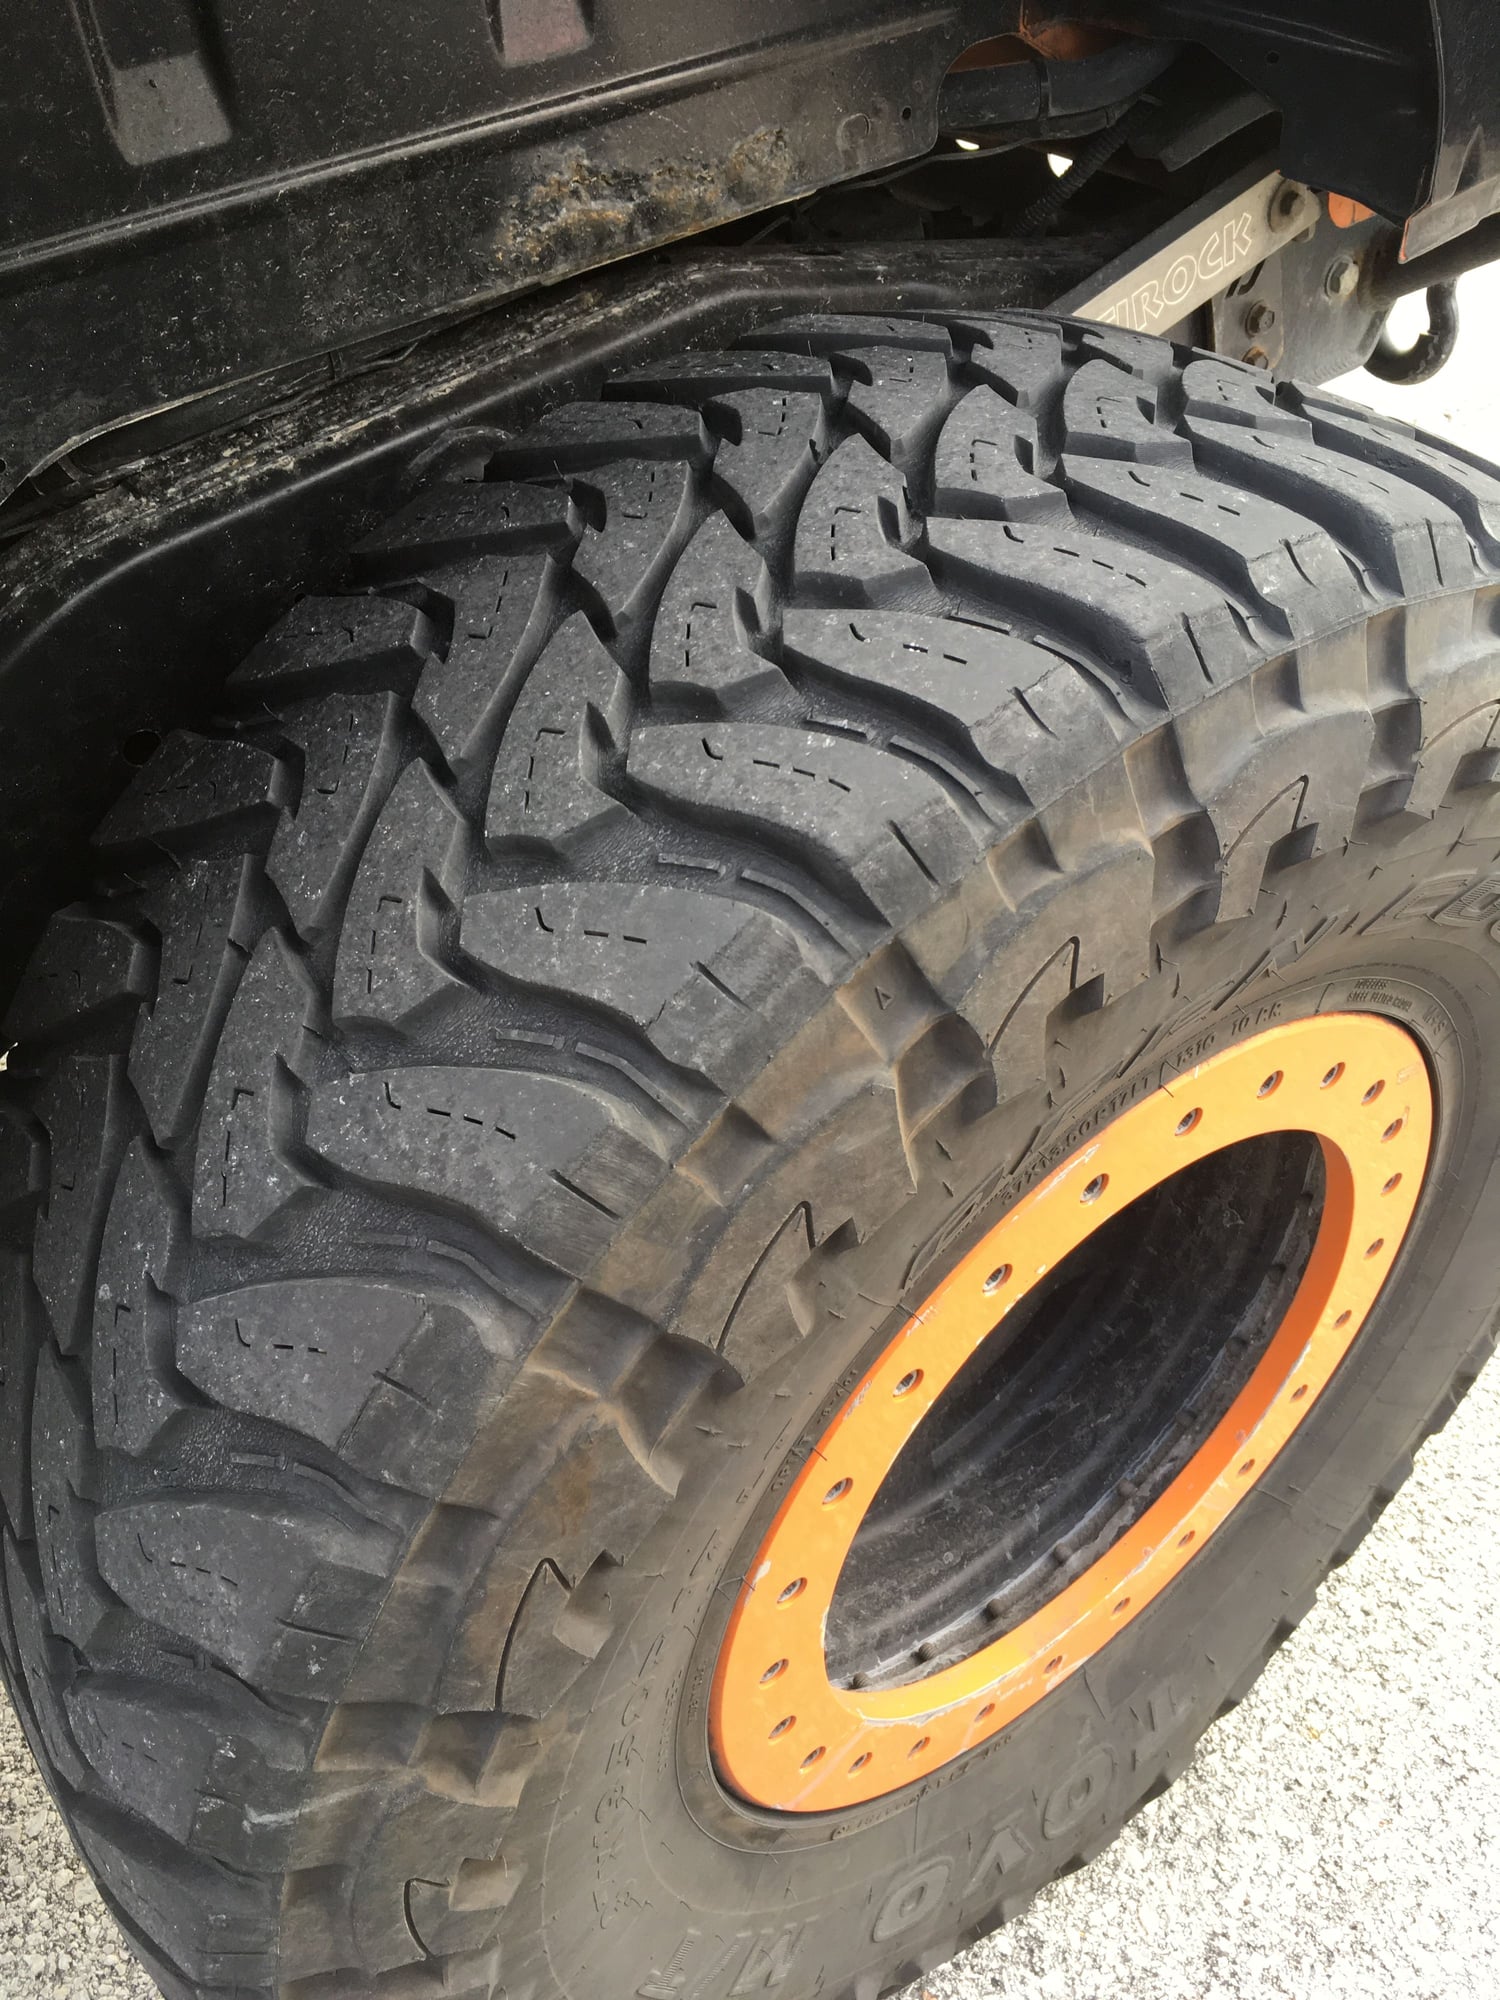 Wheels and Tires/Axles - Toyo Open County MTs 37x13.5r17 - Used - Dubuque, IA 52001, United States